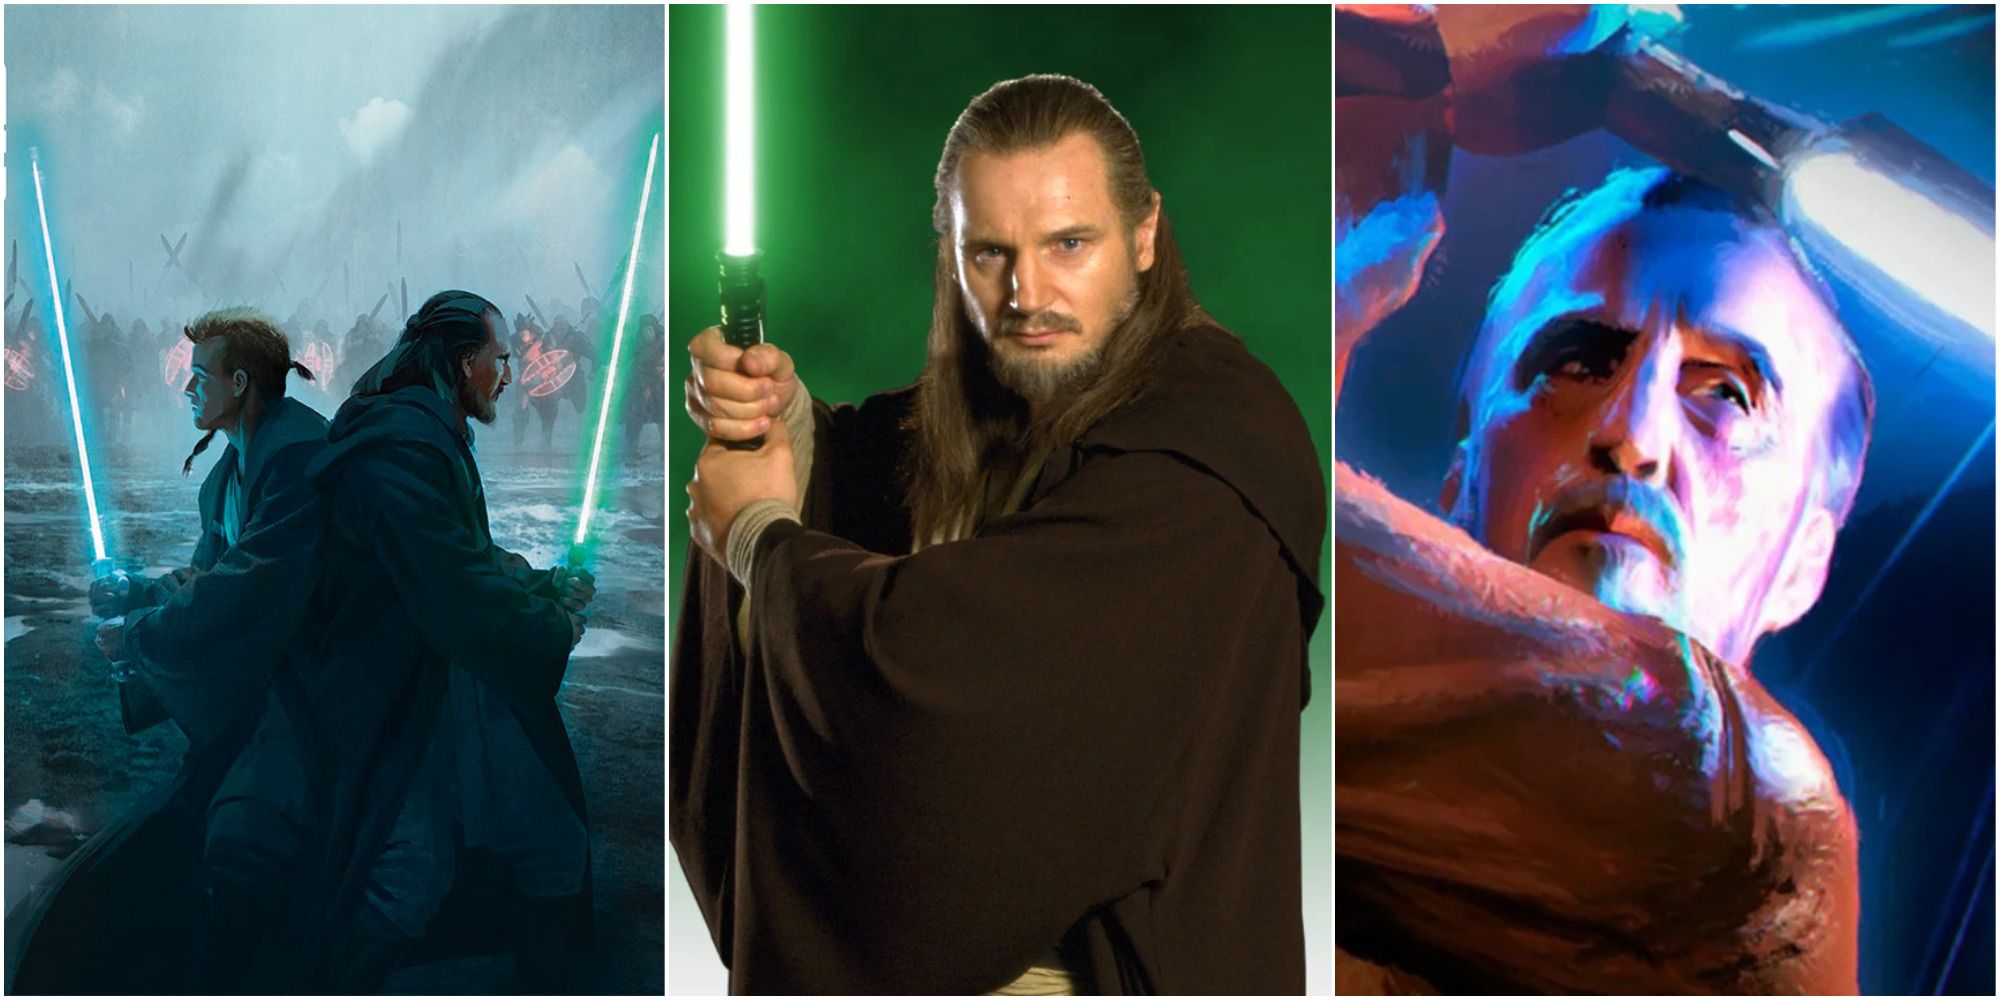 Star Wars Reveals The Jedi Could Have Prevented Qui-Gon Jinn's Death